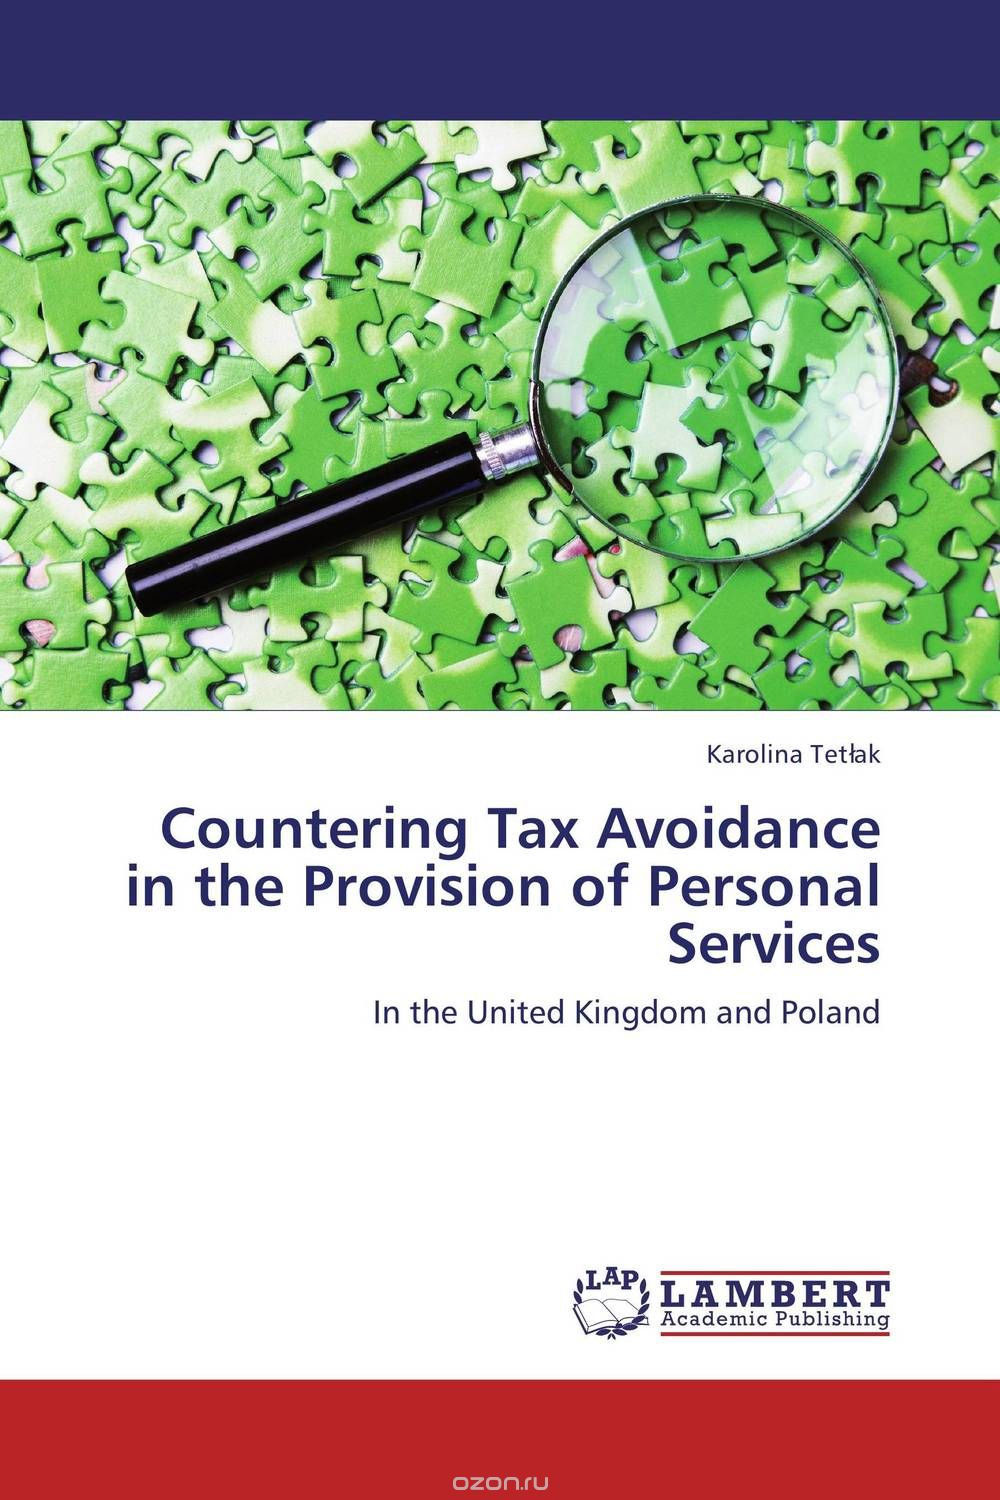 Скачать книгу "Countering Tax Avoidance in the Provision of Personal Services"